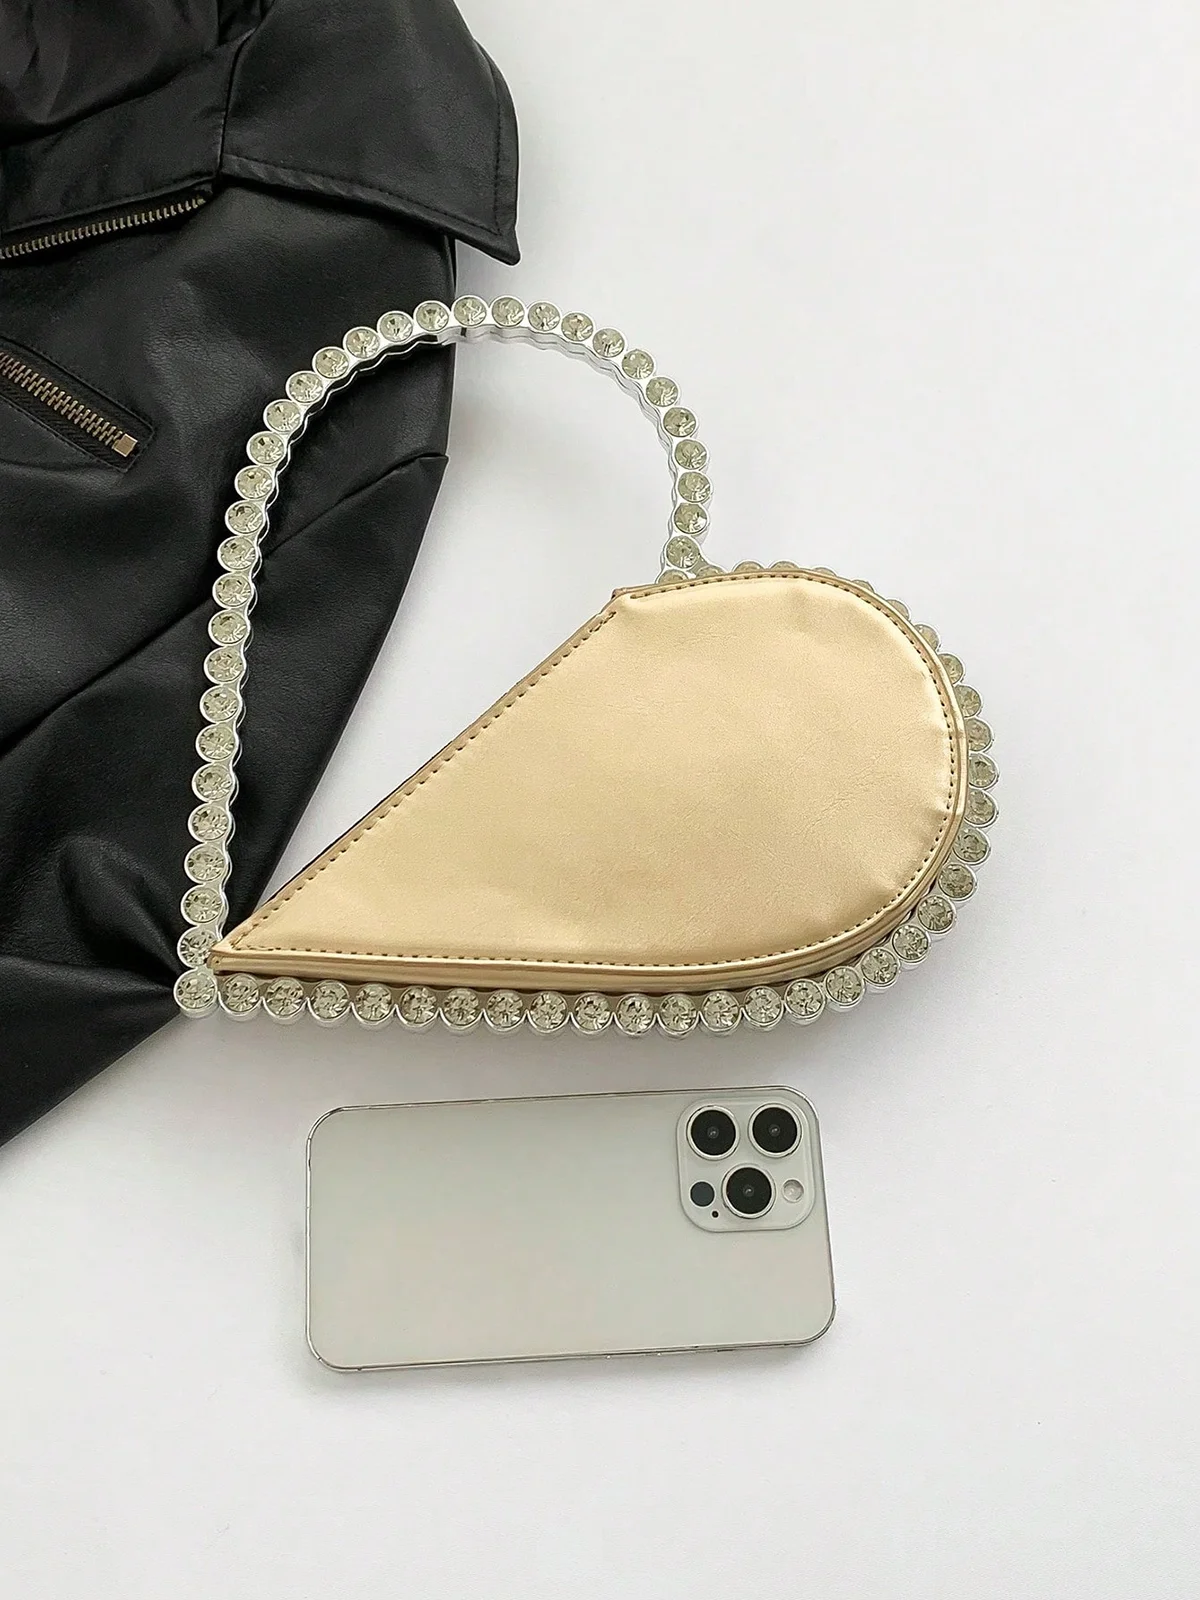 Banquet Party Heart Shaped Diamond Leather Ladies Clutch Elegant